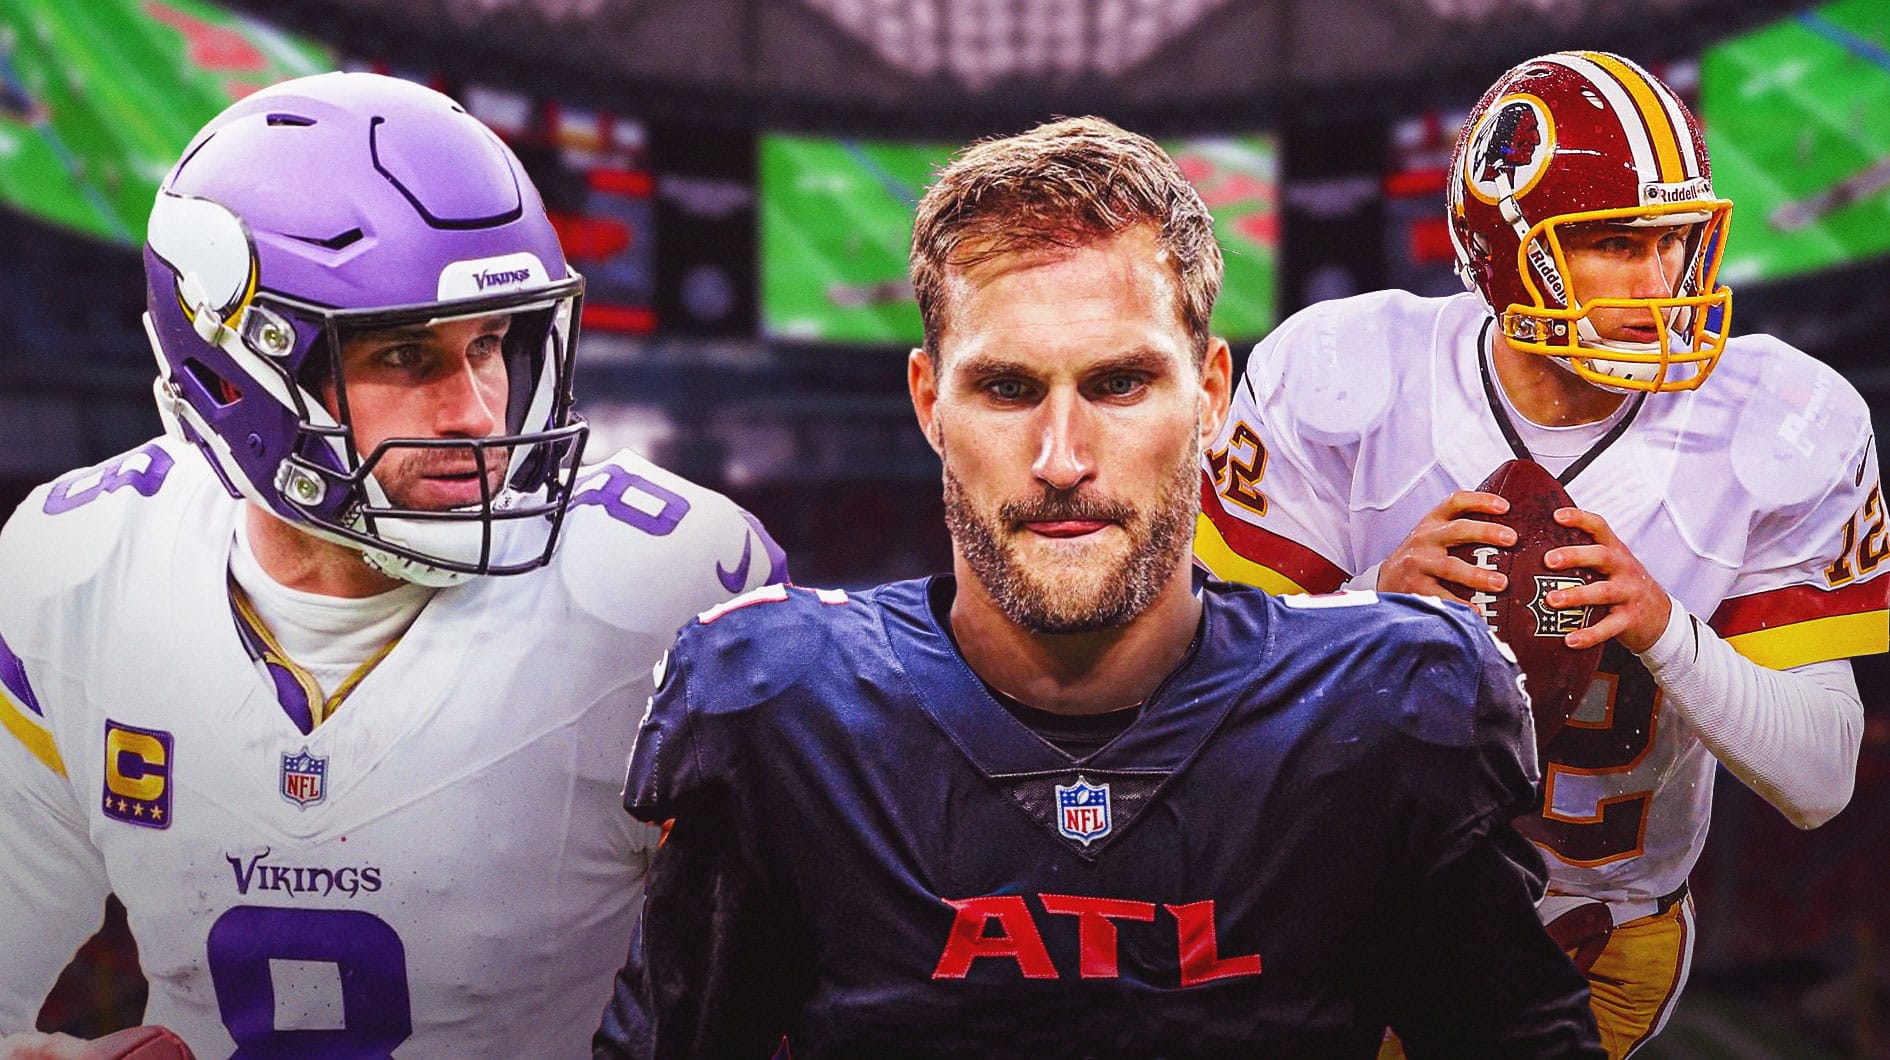 Kirk Cousins playing for the Vikings, Falcons and Redskins.